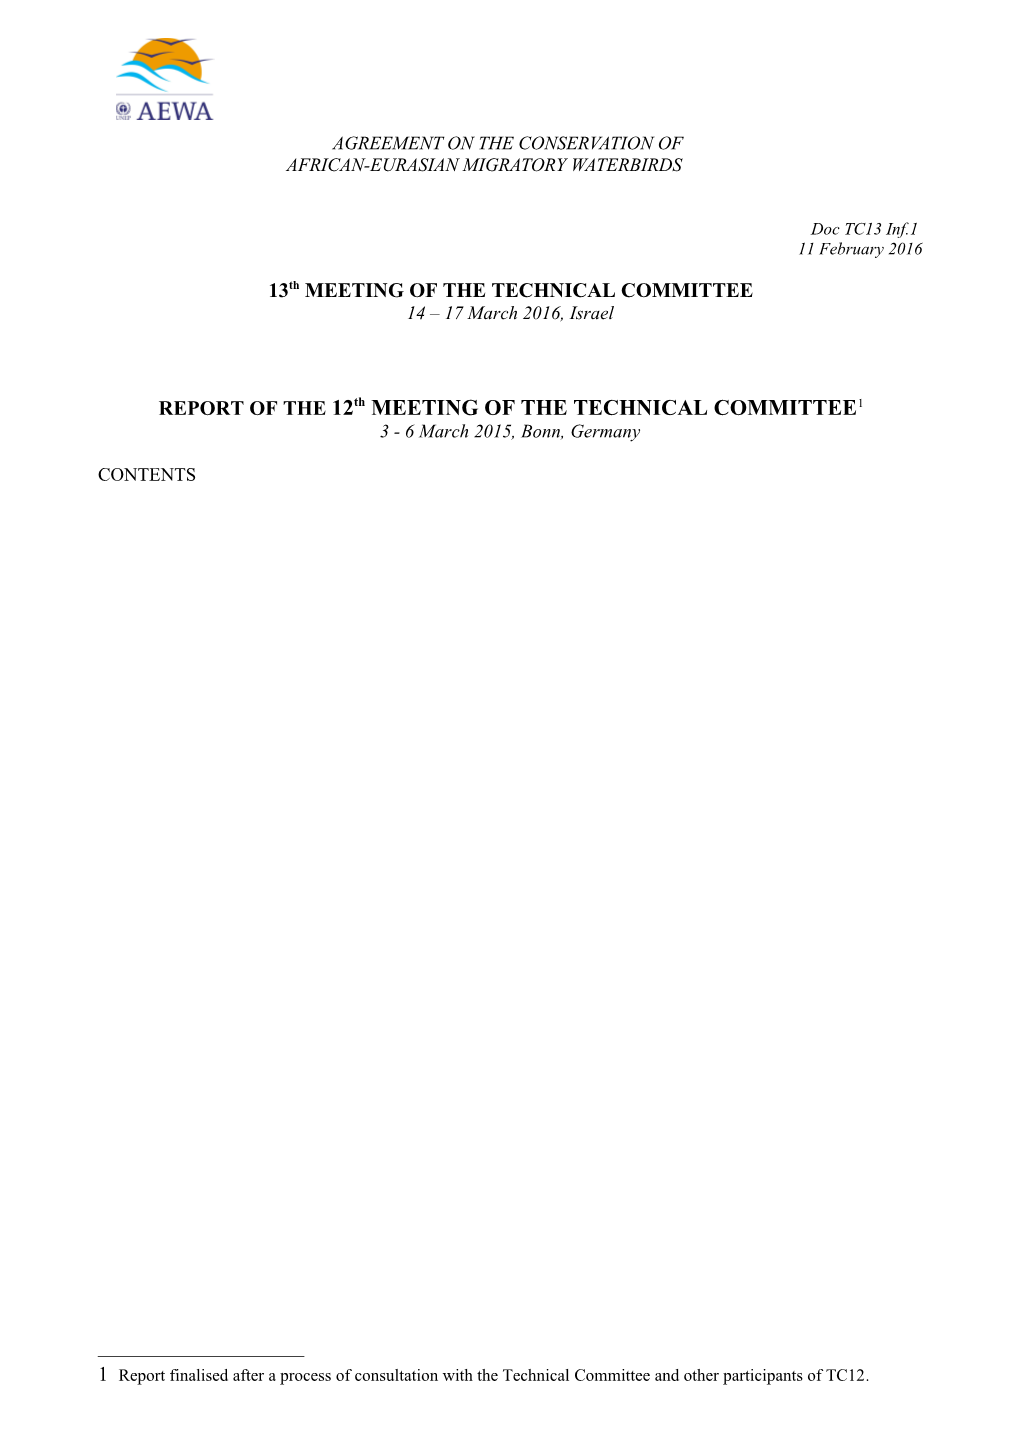 REPORT of the 12Th MEETING of the TECHNICAL COMMITTEE 1